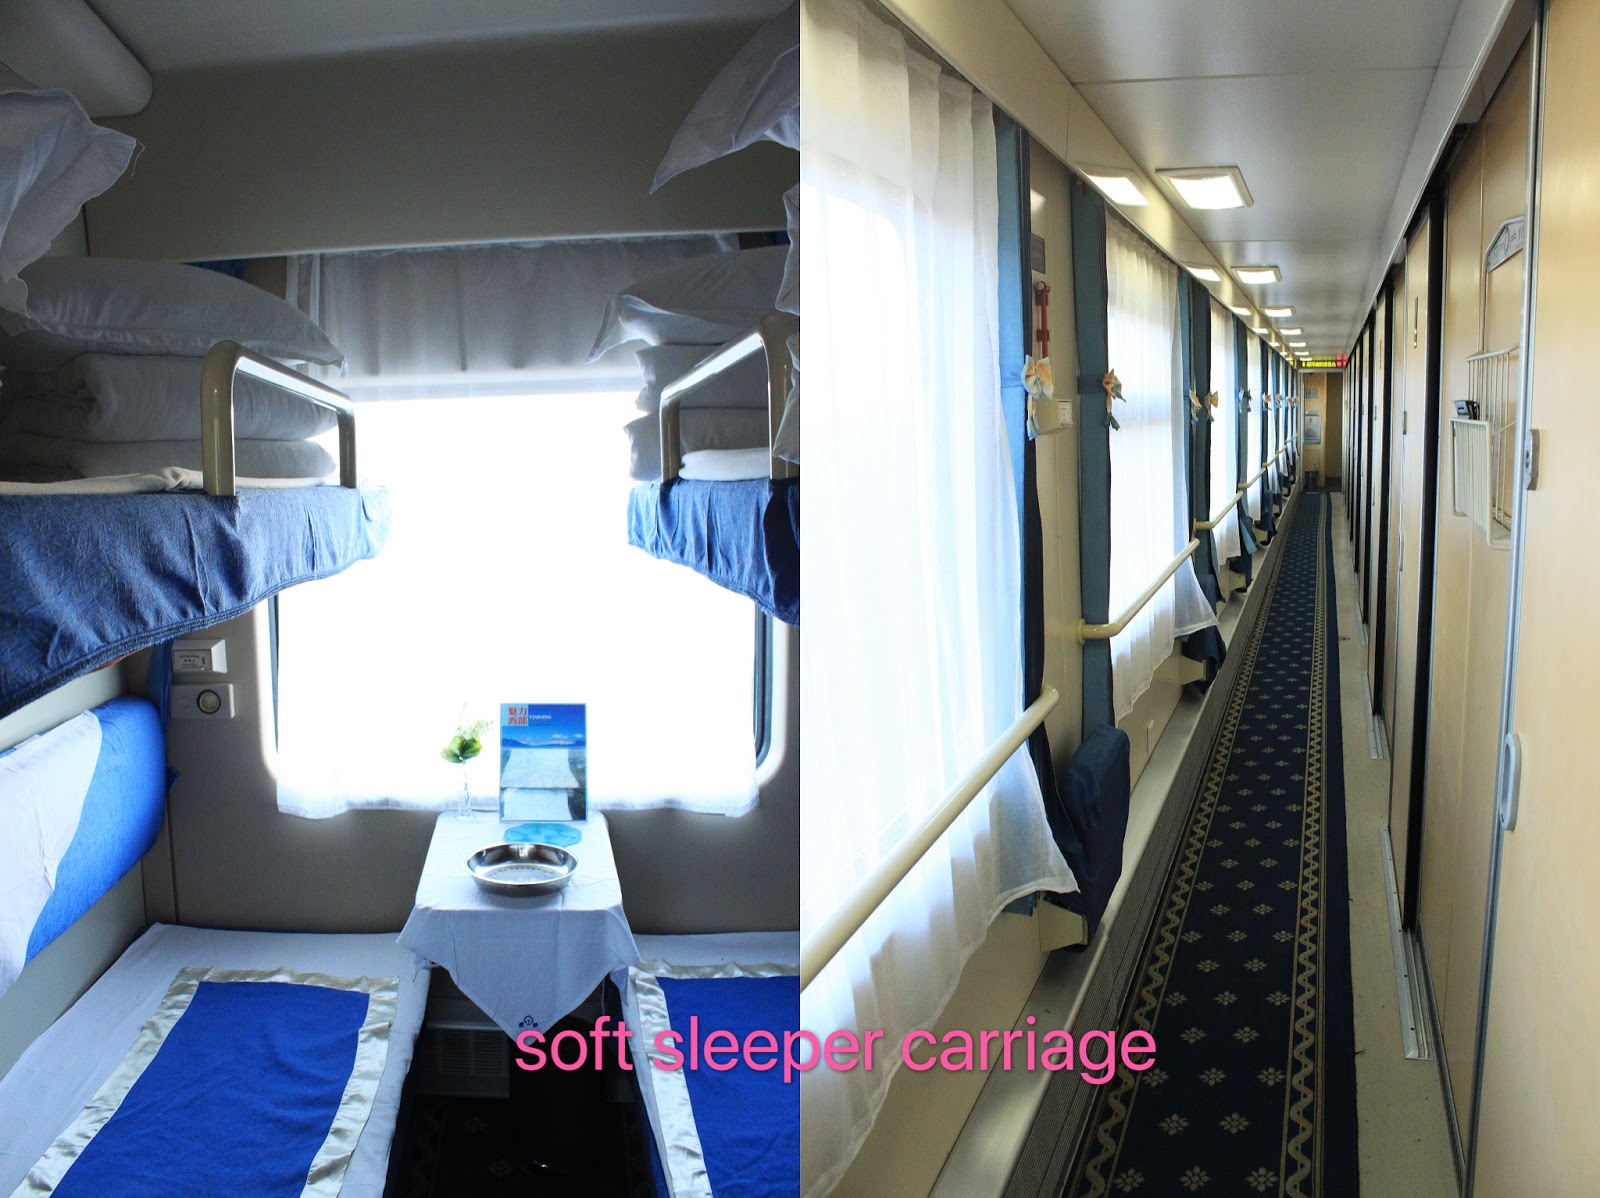 Soft sleeper carriages